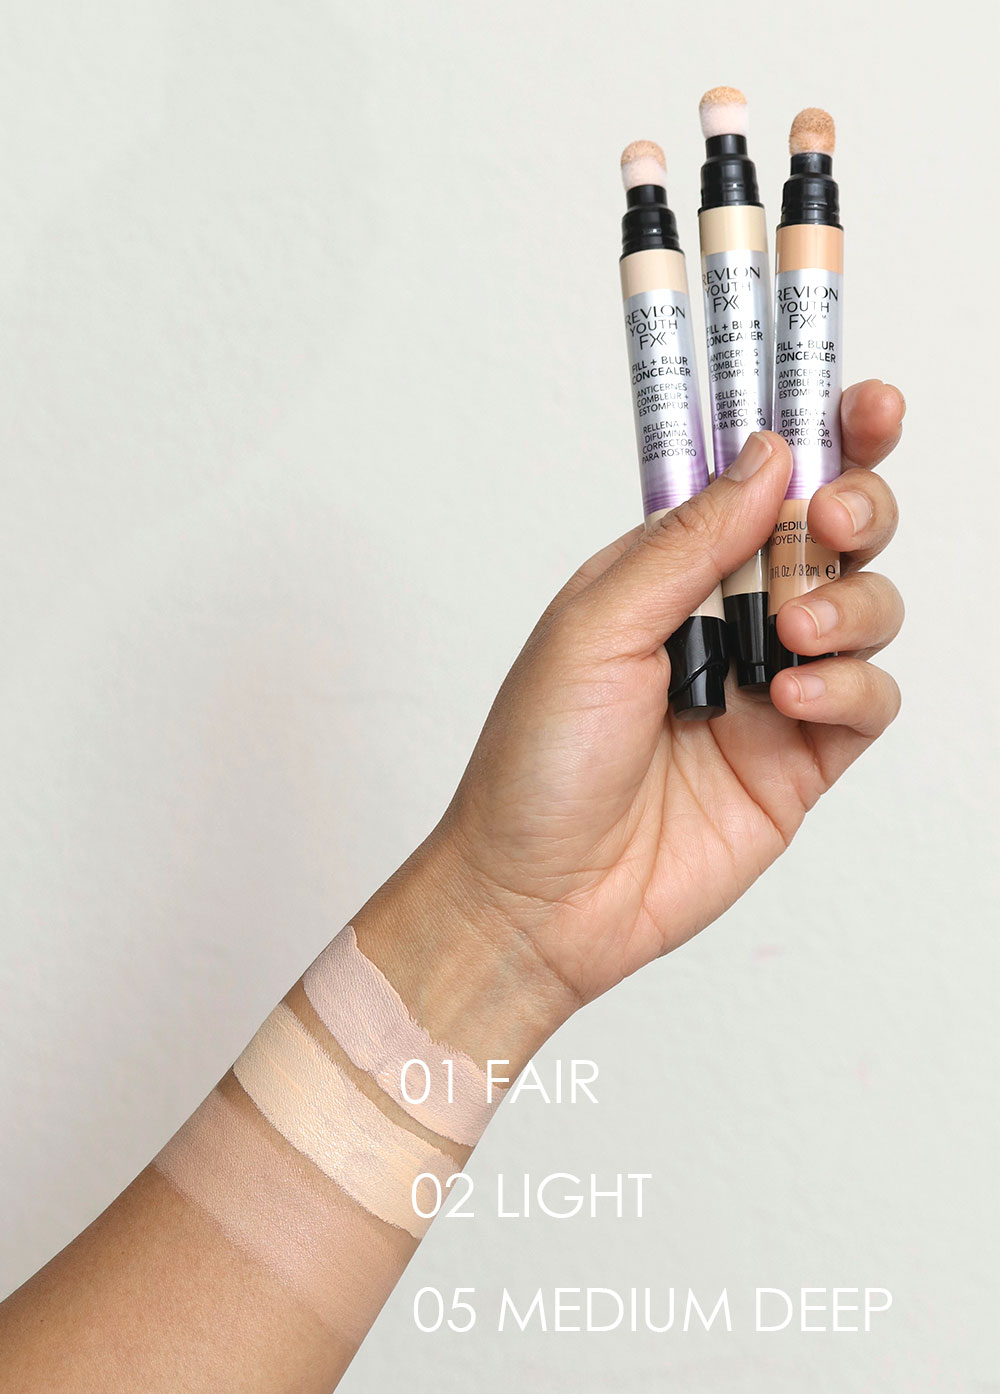 revlon youth fx fill blur concealer swatches